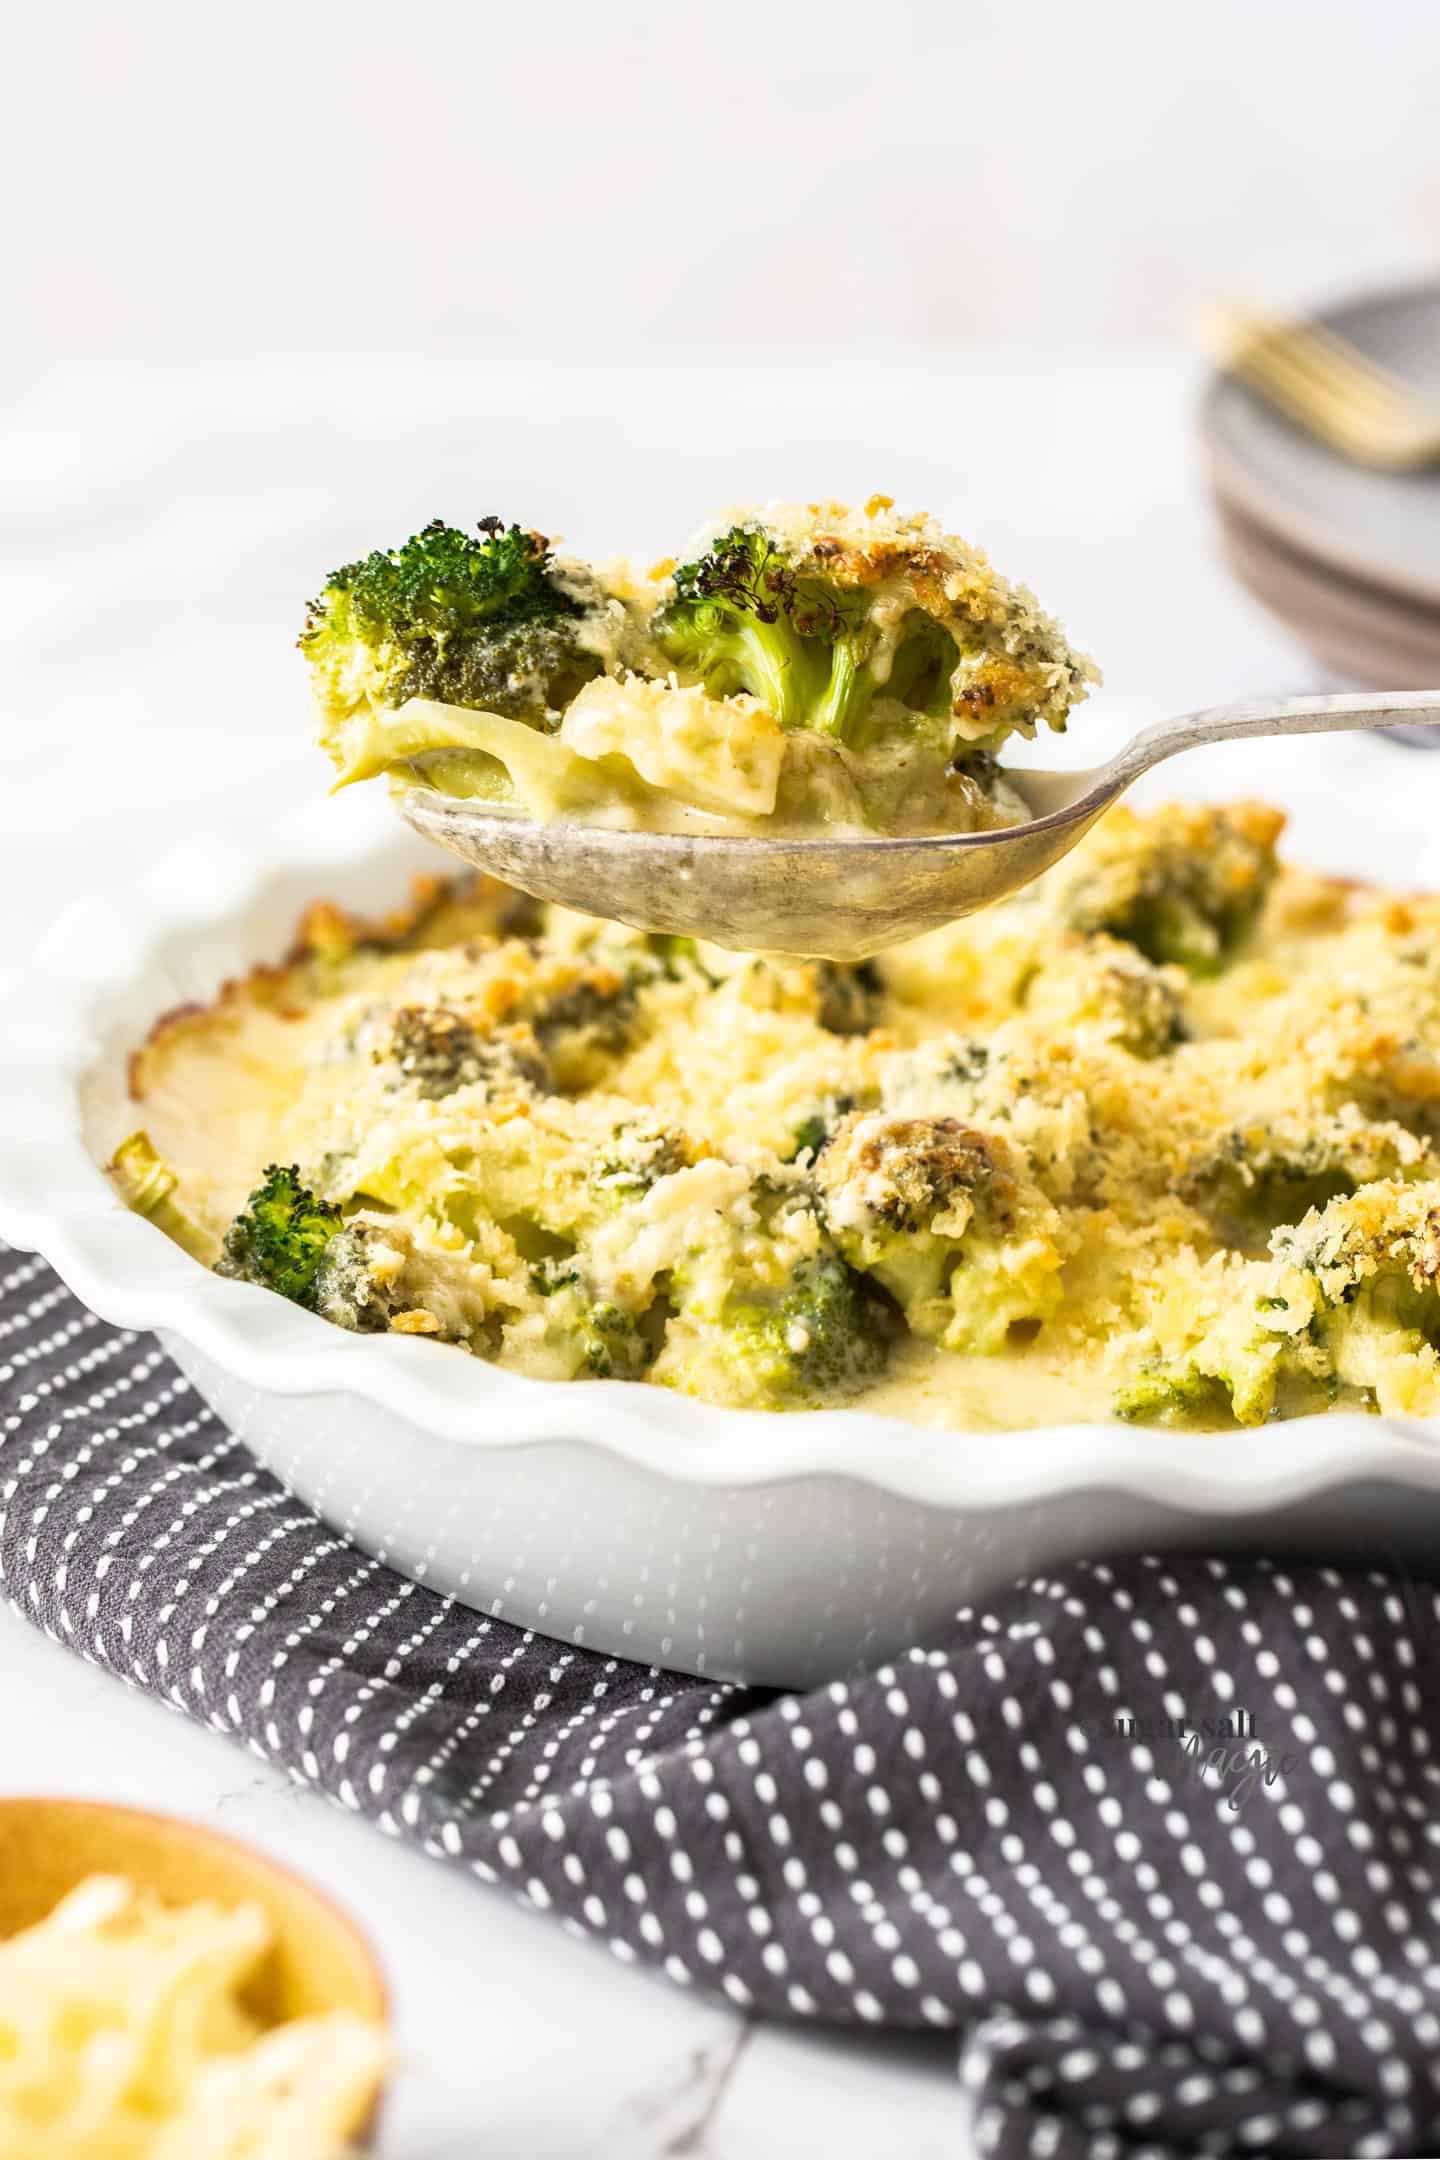 A spoon scooping broccoli cheese out of a baking dish.